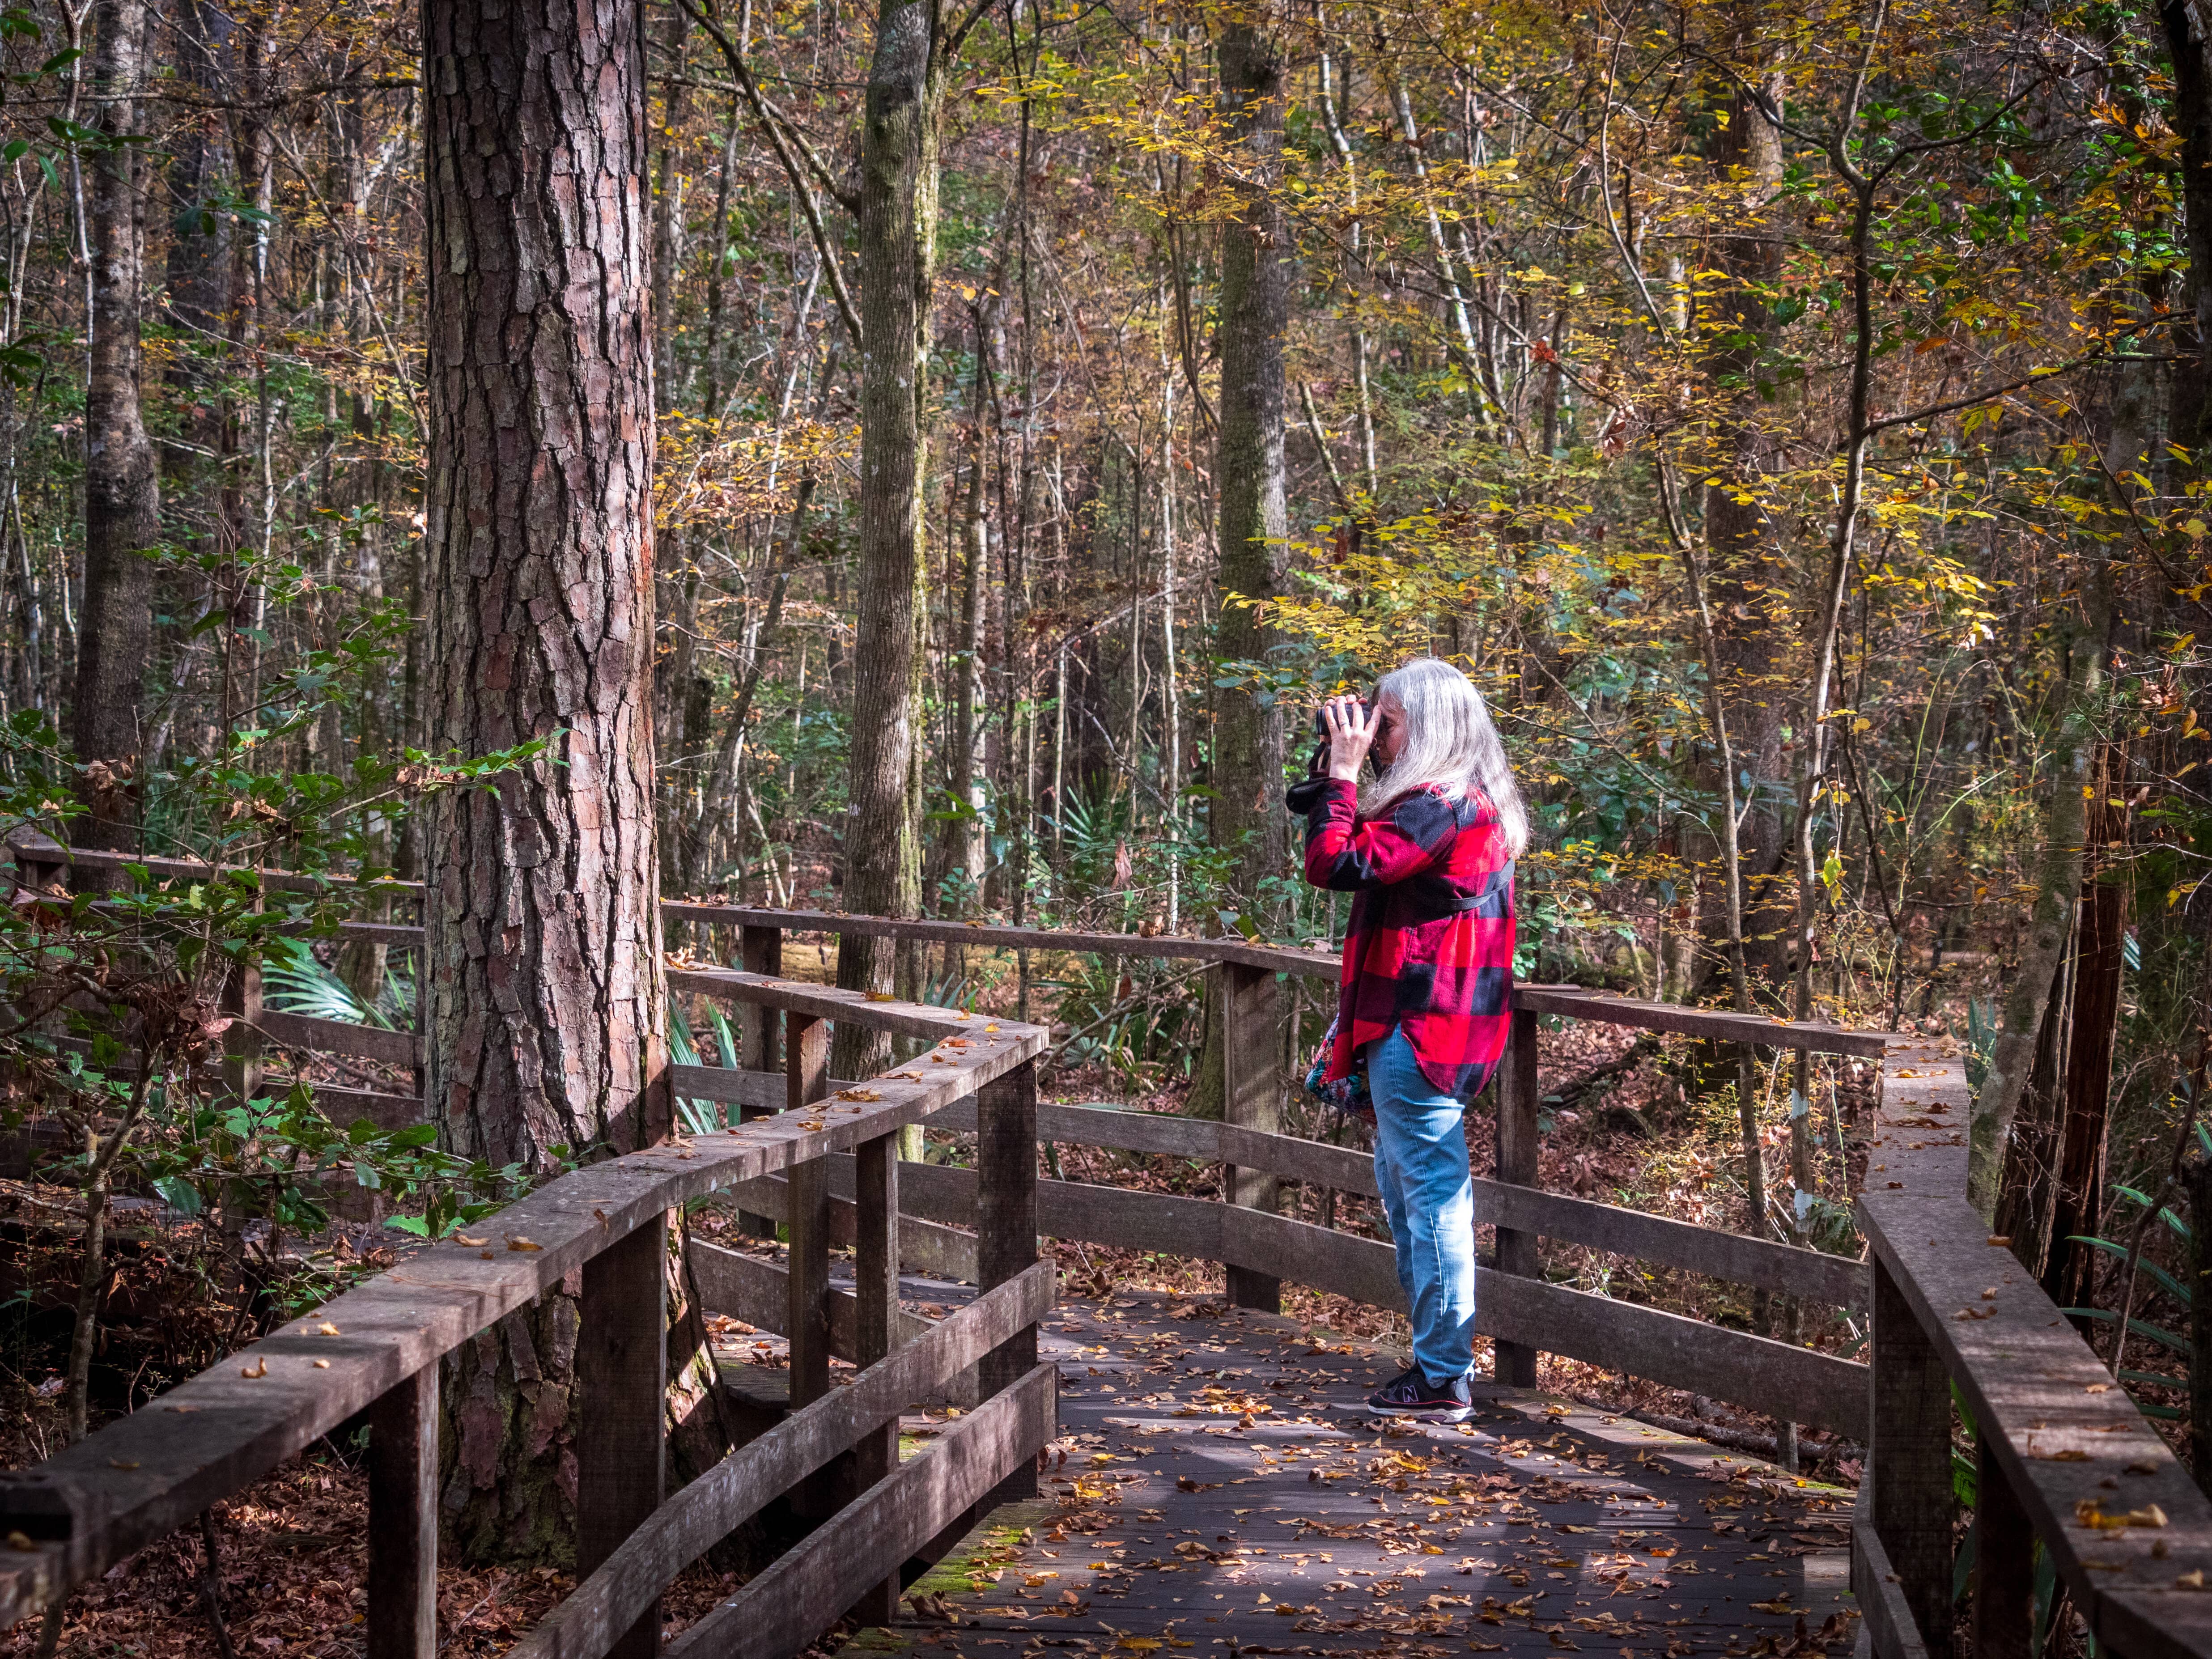 A woman with a red flannel shirt and blue jeans is looking through binoculars on a wooden boardwalk surrounded by trees. 